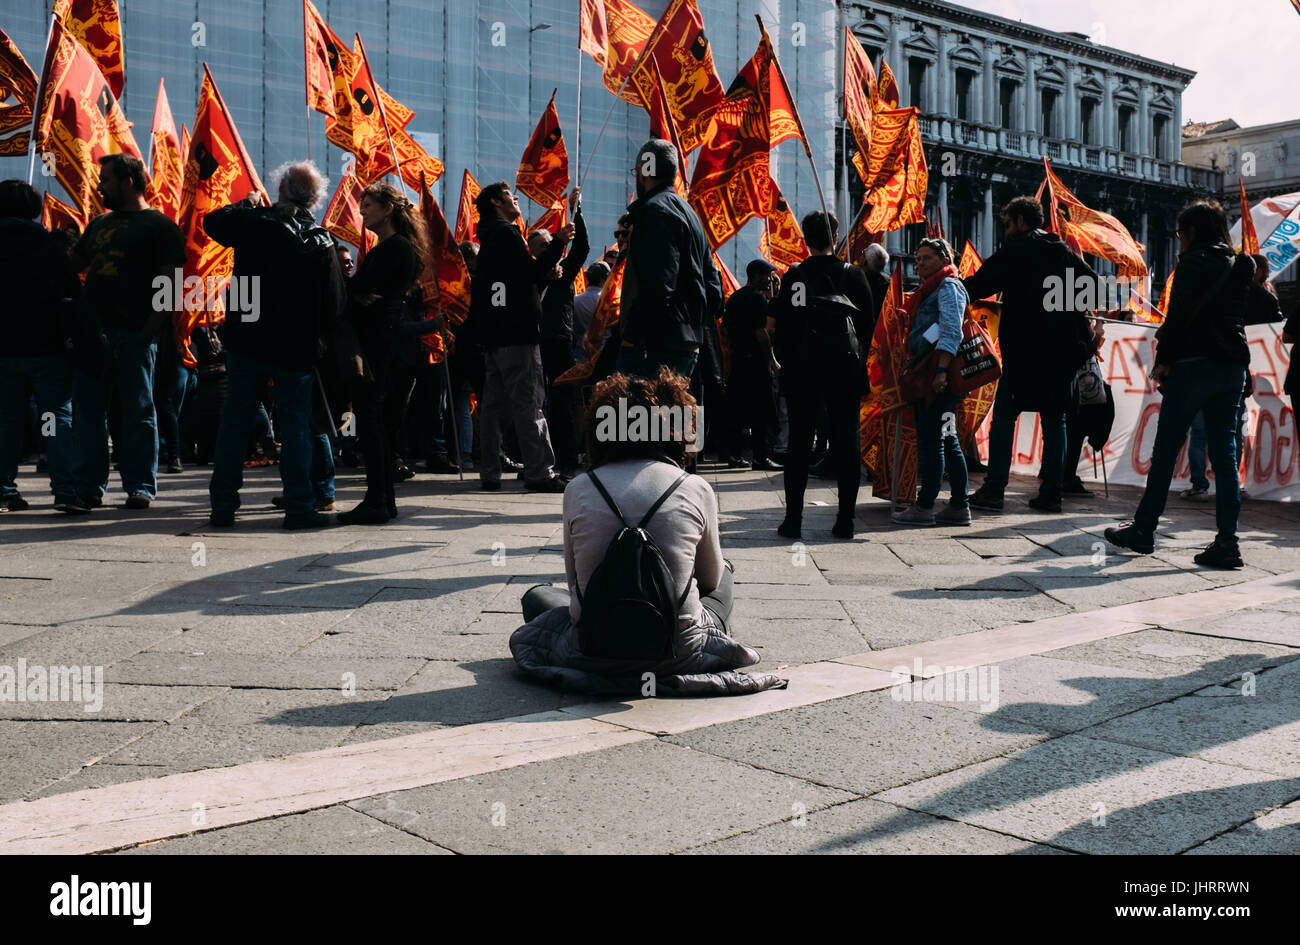 A peaceful protest captured at San Marco square in Venice, Italy. Stock Photo